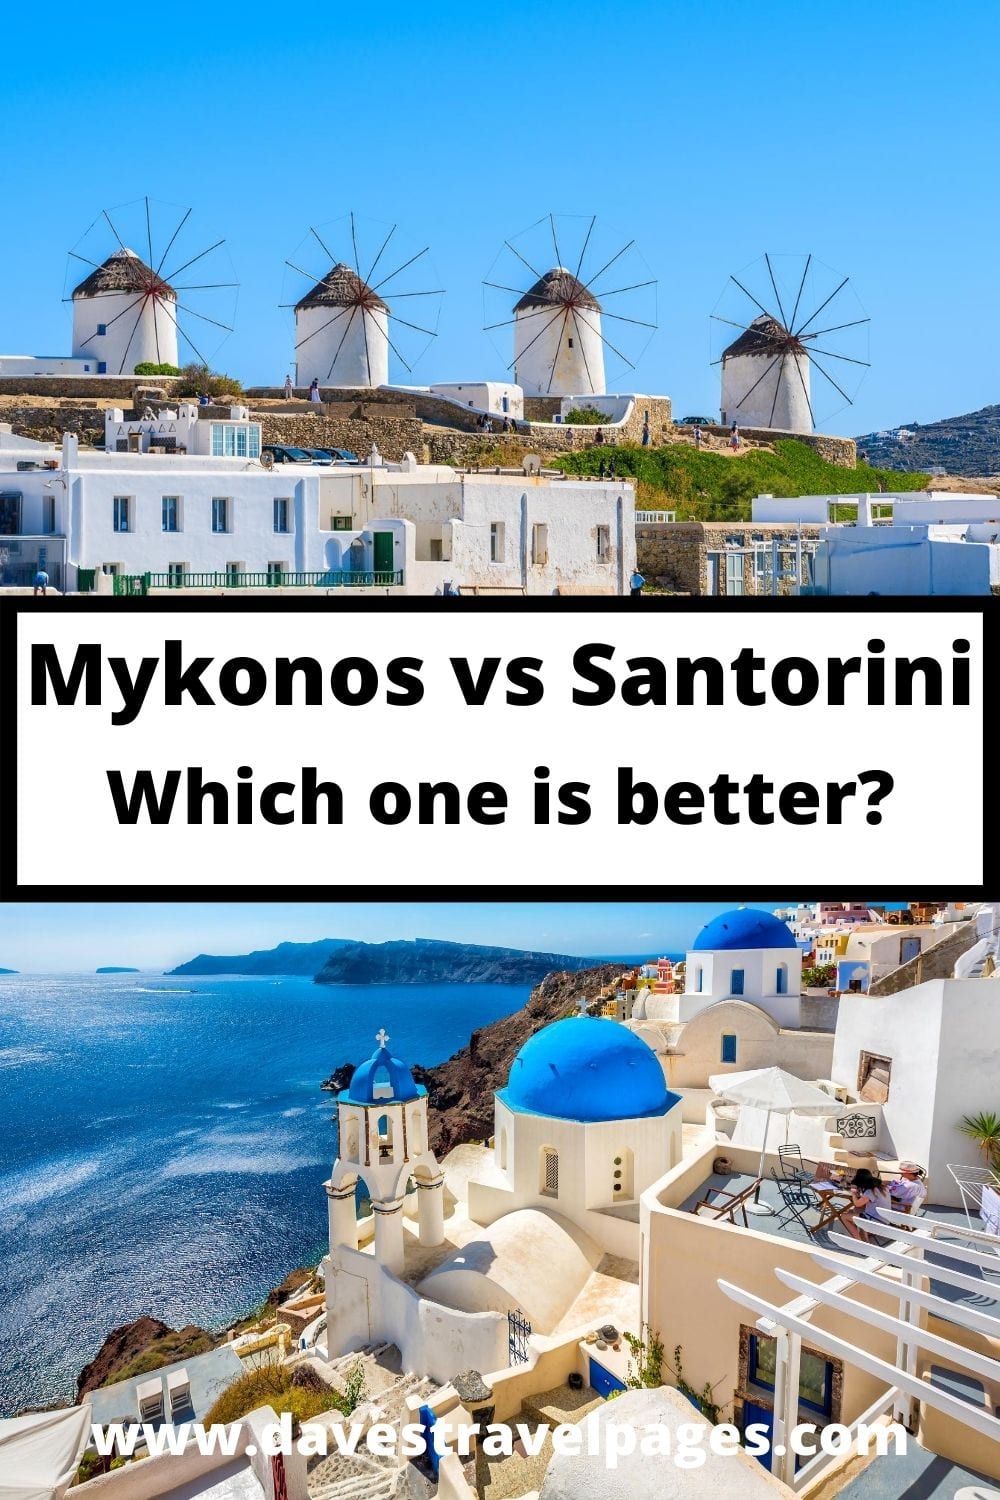 Which one is better Mykonos or Santorini?